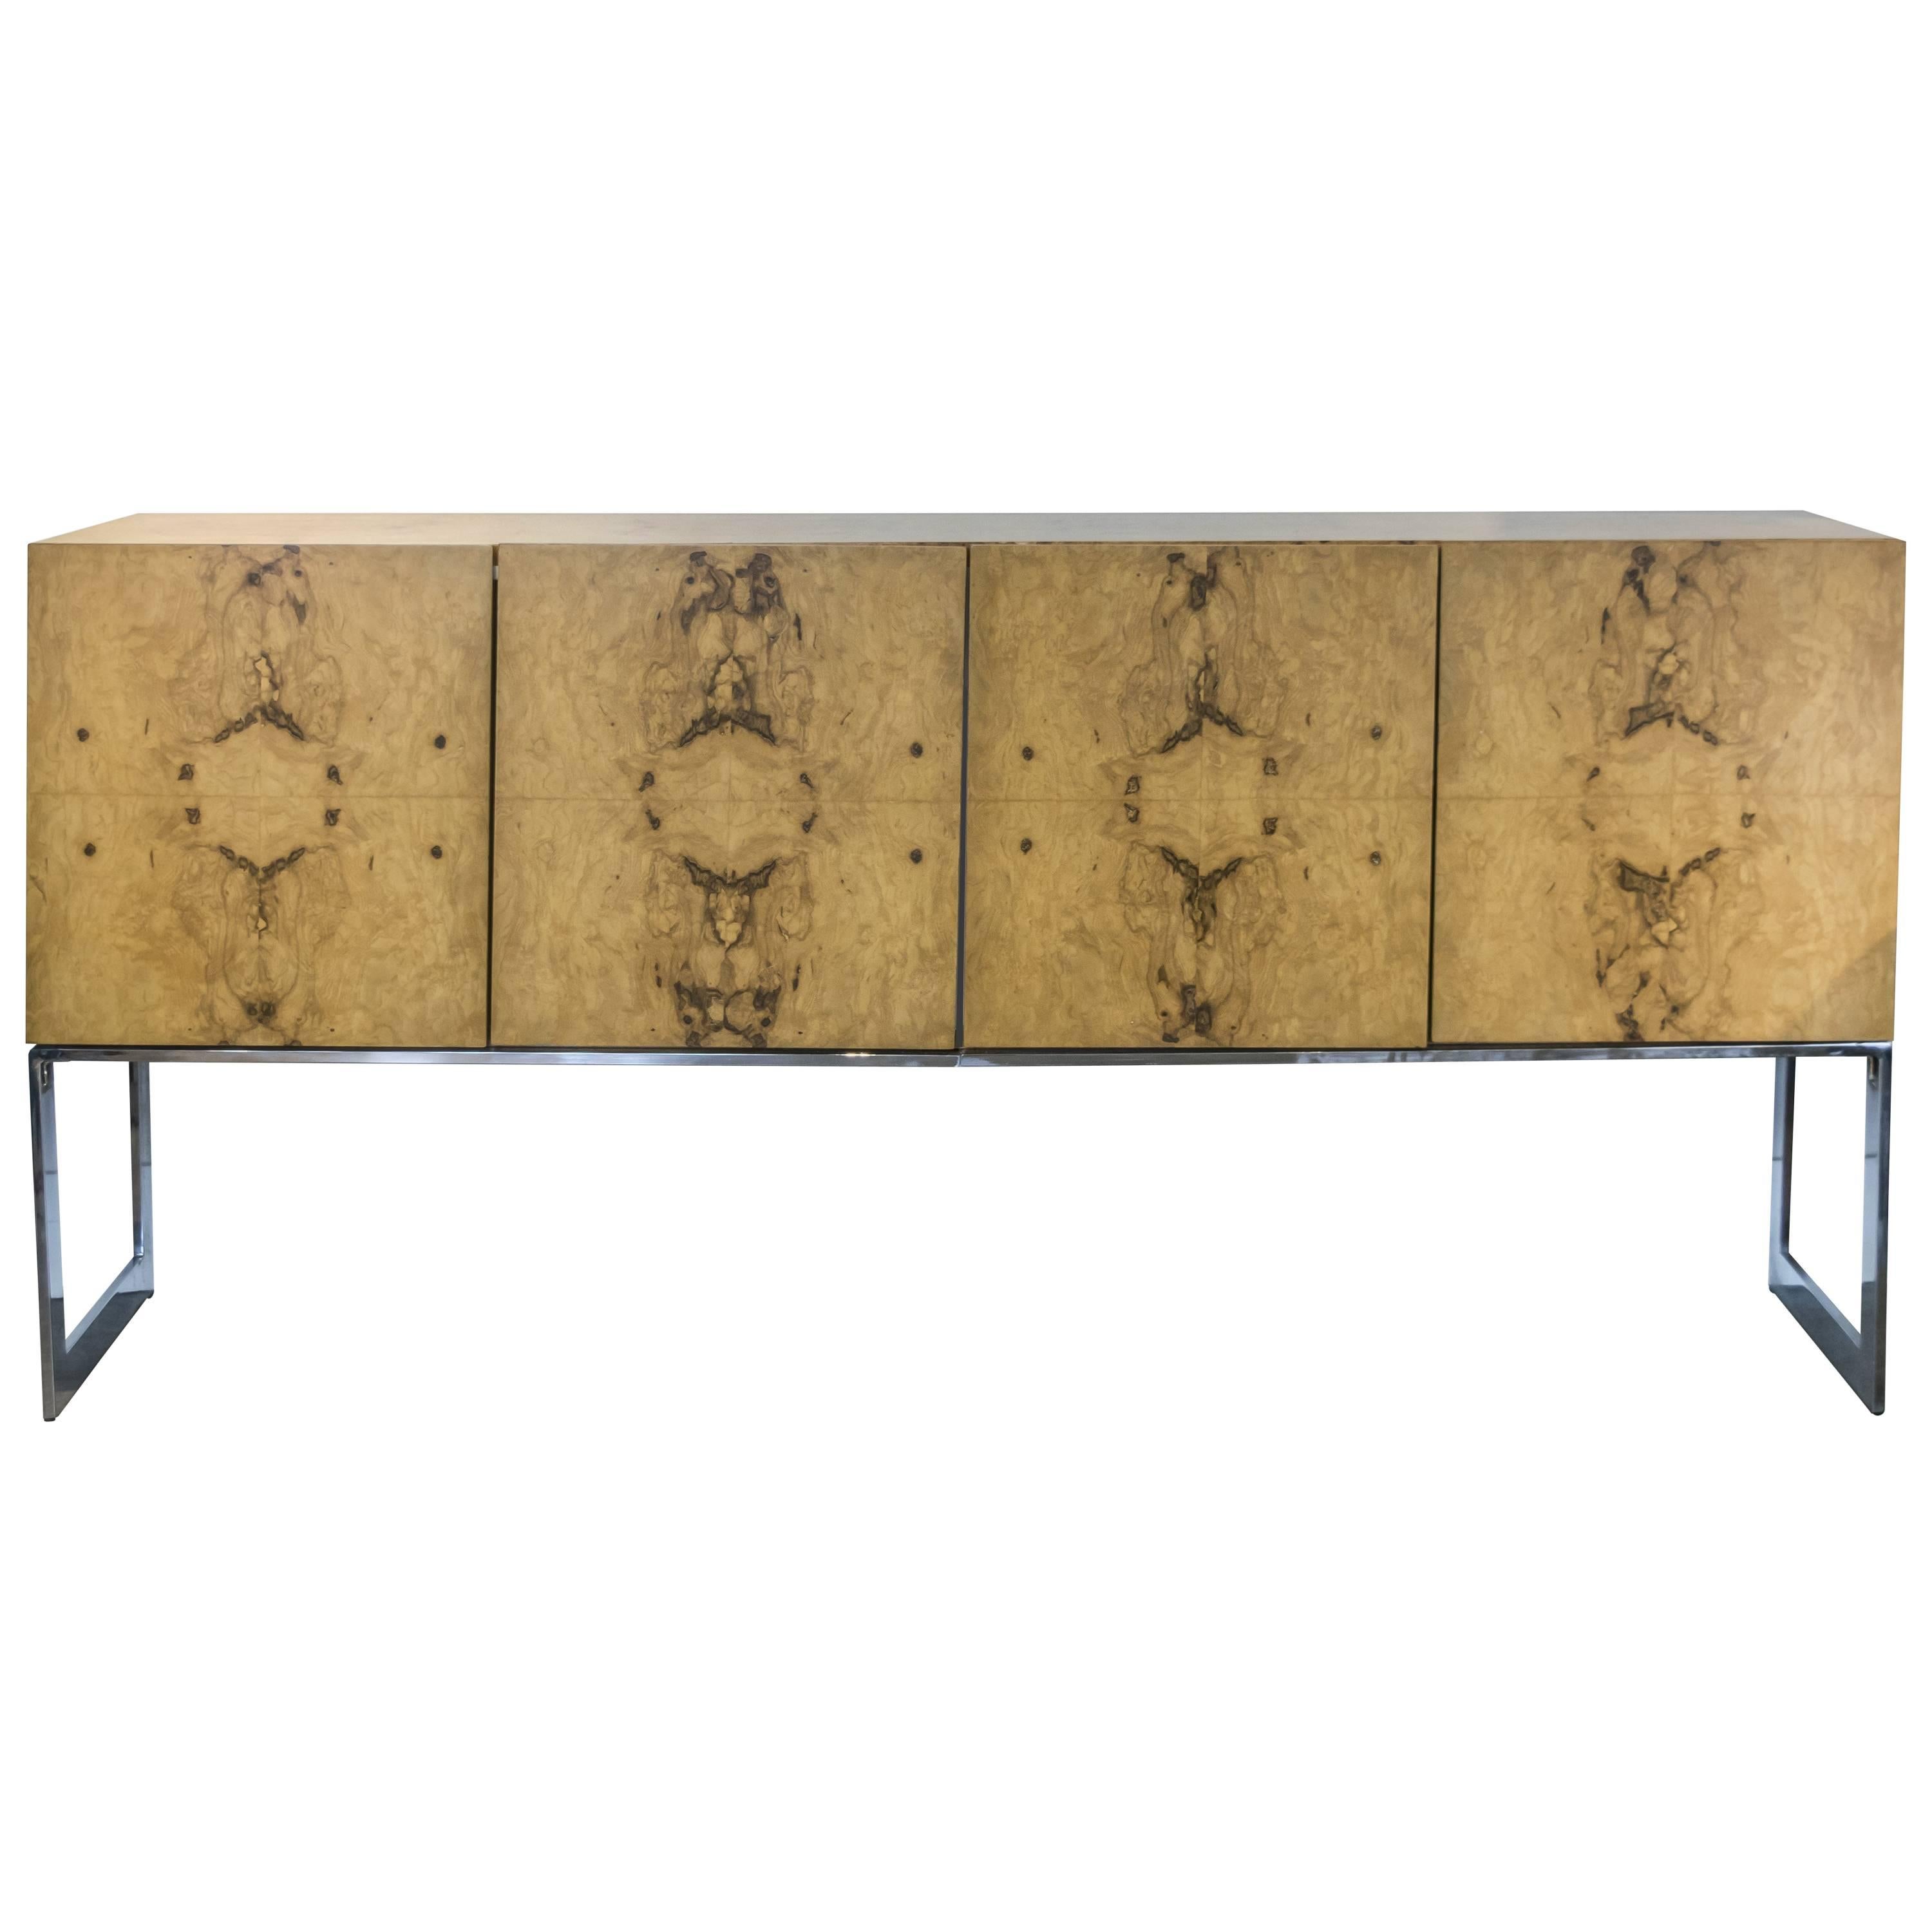 Milo Baughman for Thayer Coggin Olive Burl Wood Credenza with Chrome Base For Sale